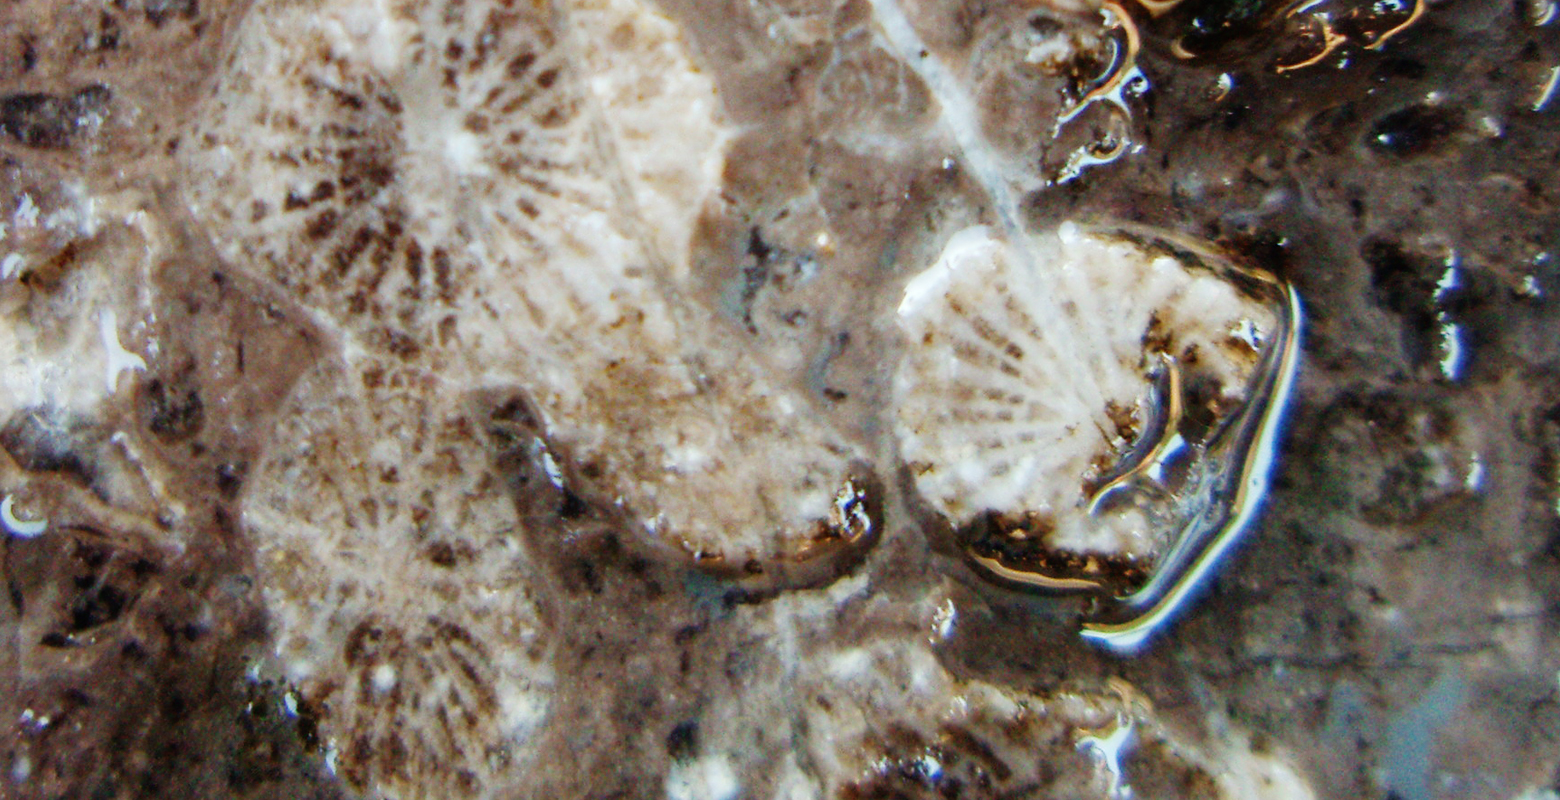 Fossil coral / Fossil coral